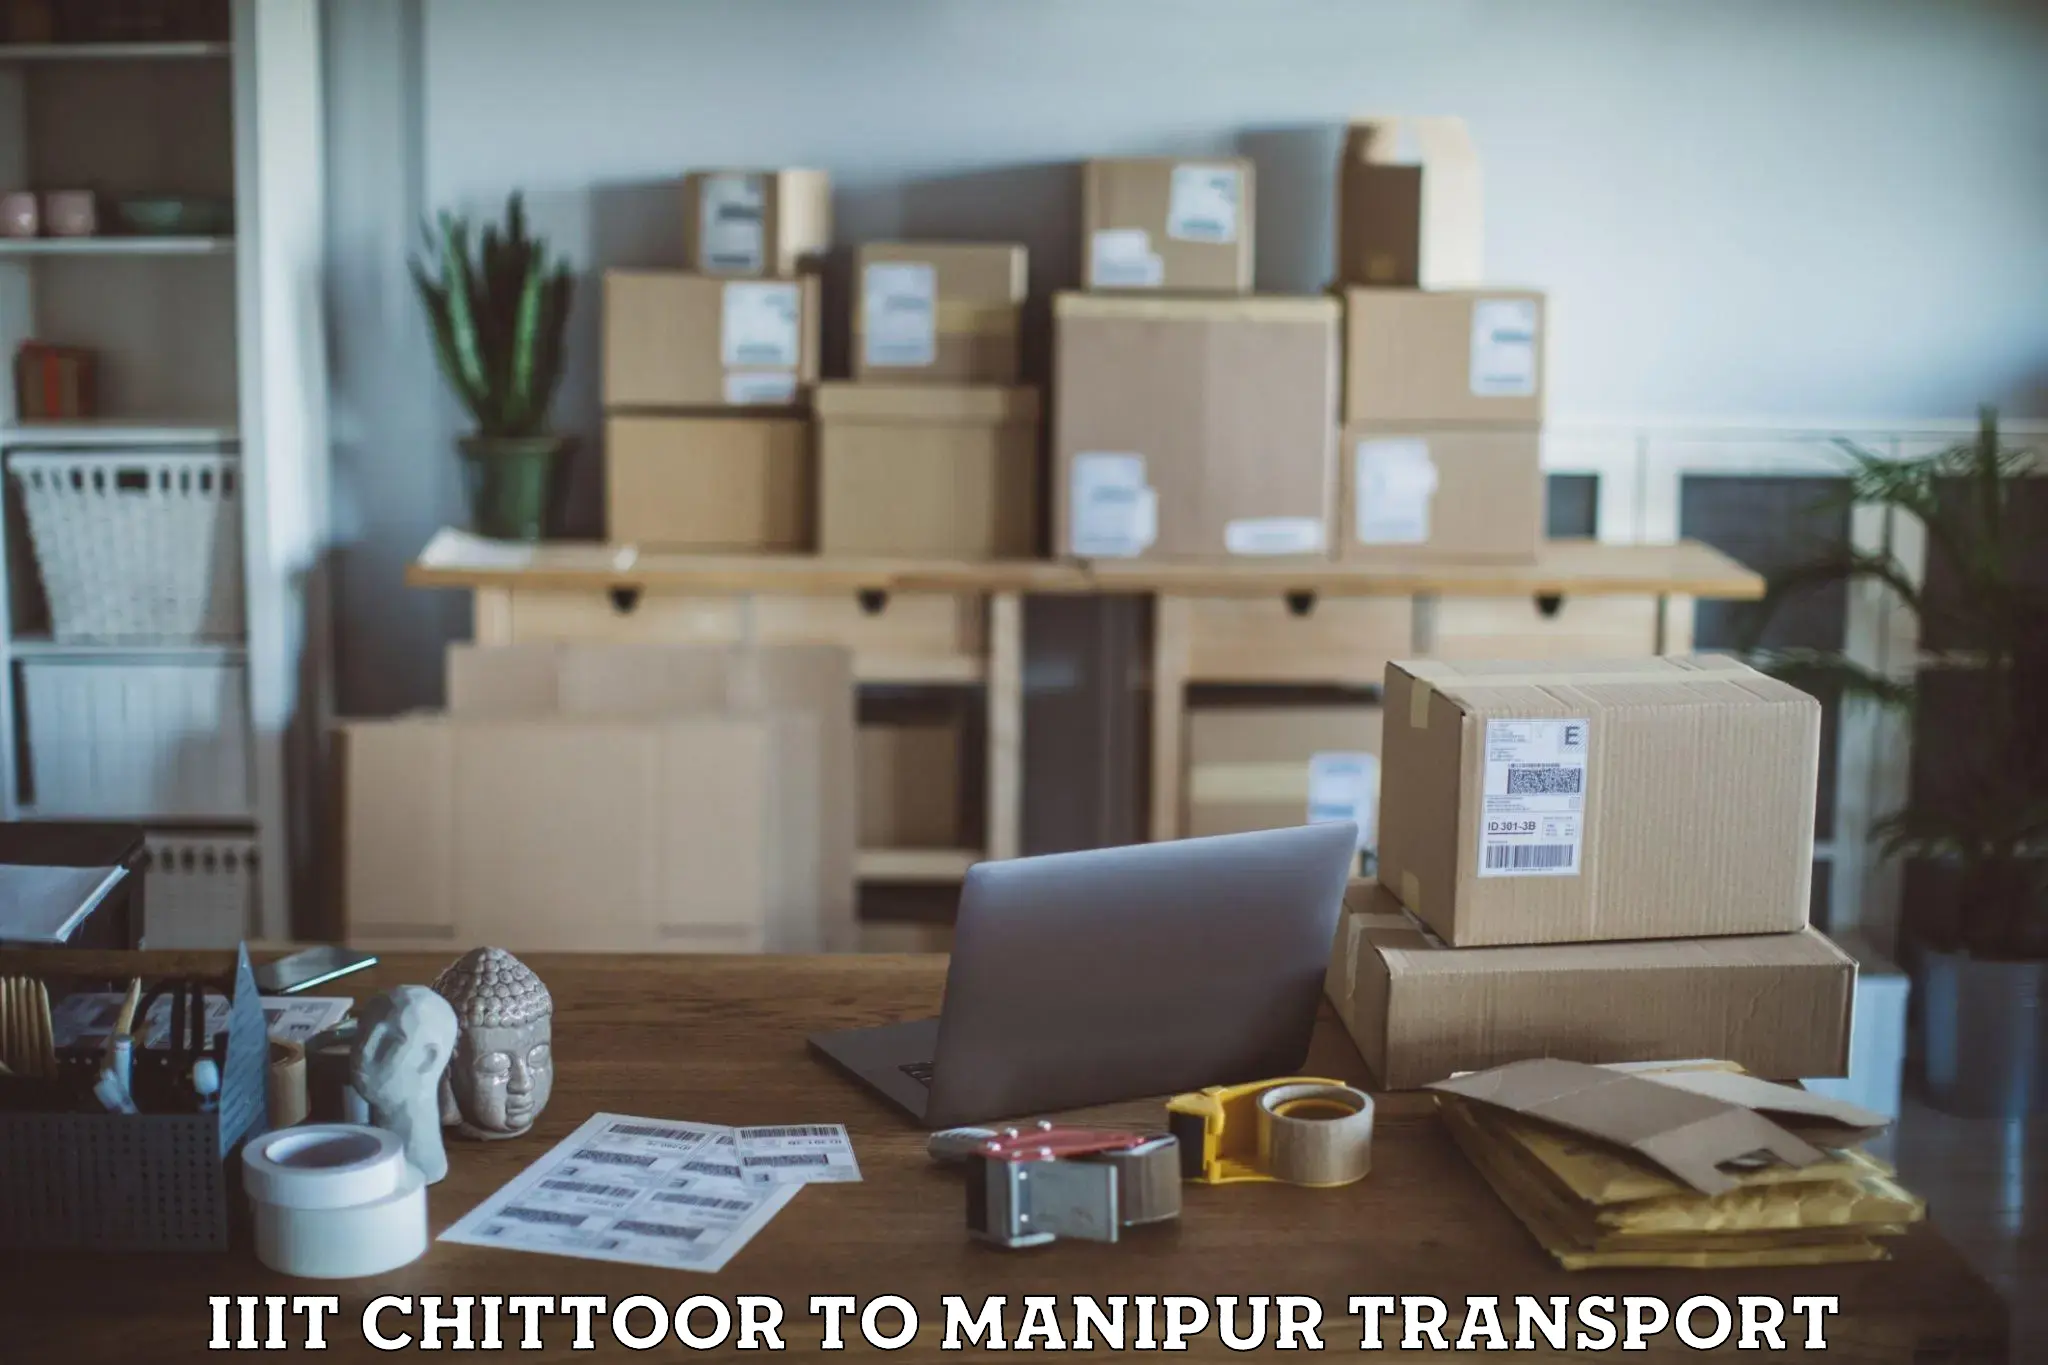 Container transport service IIIT Chittoor to Manipur